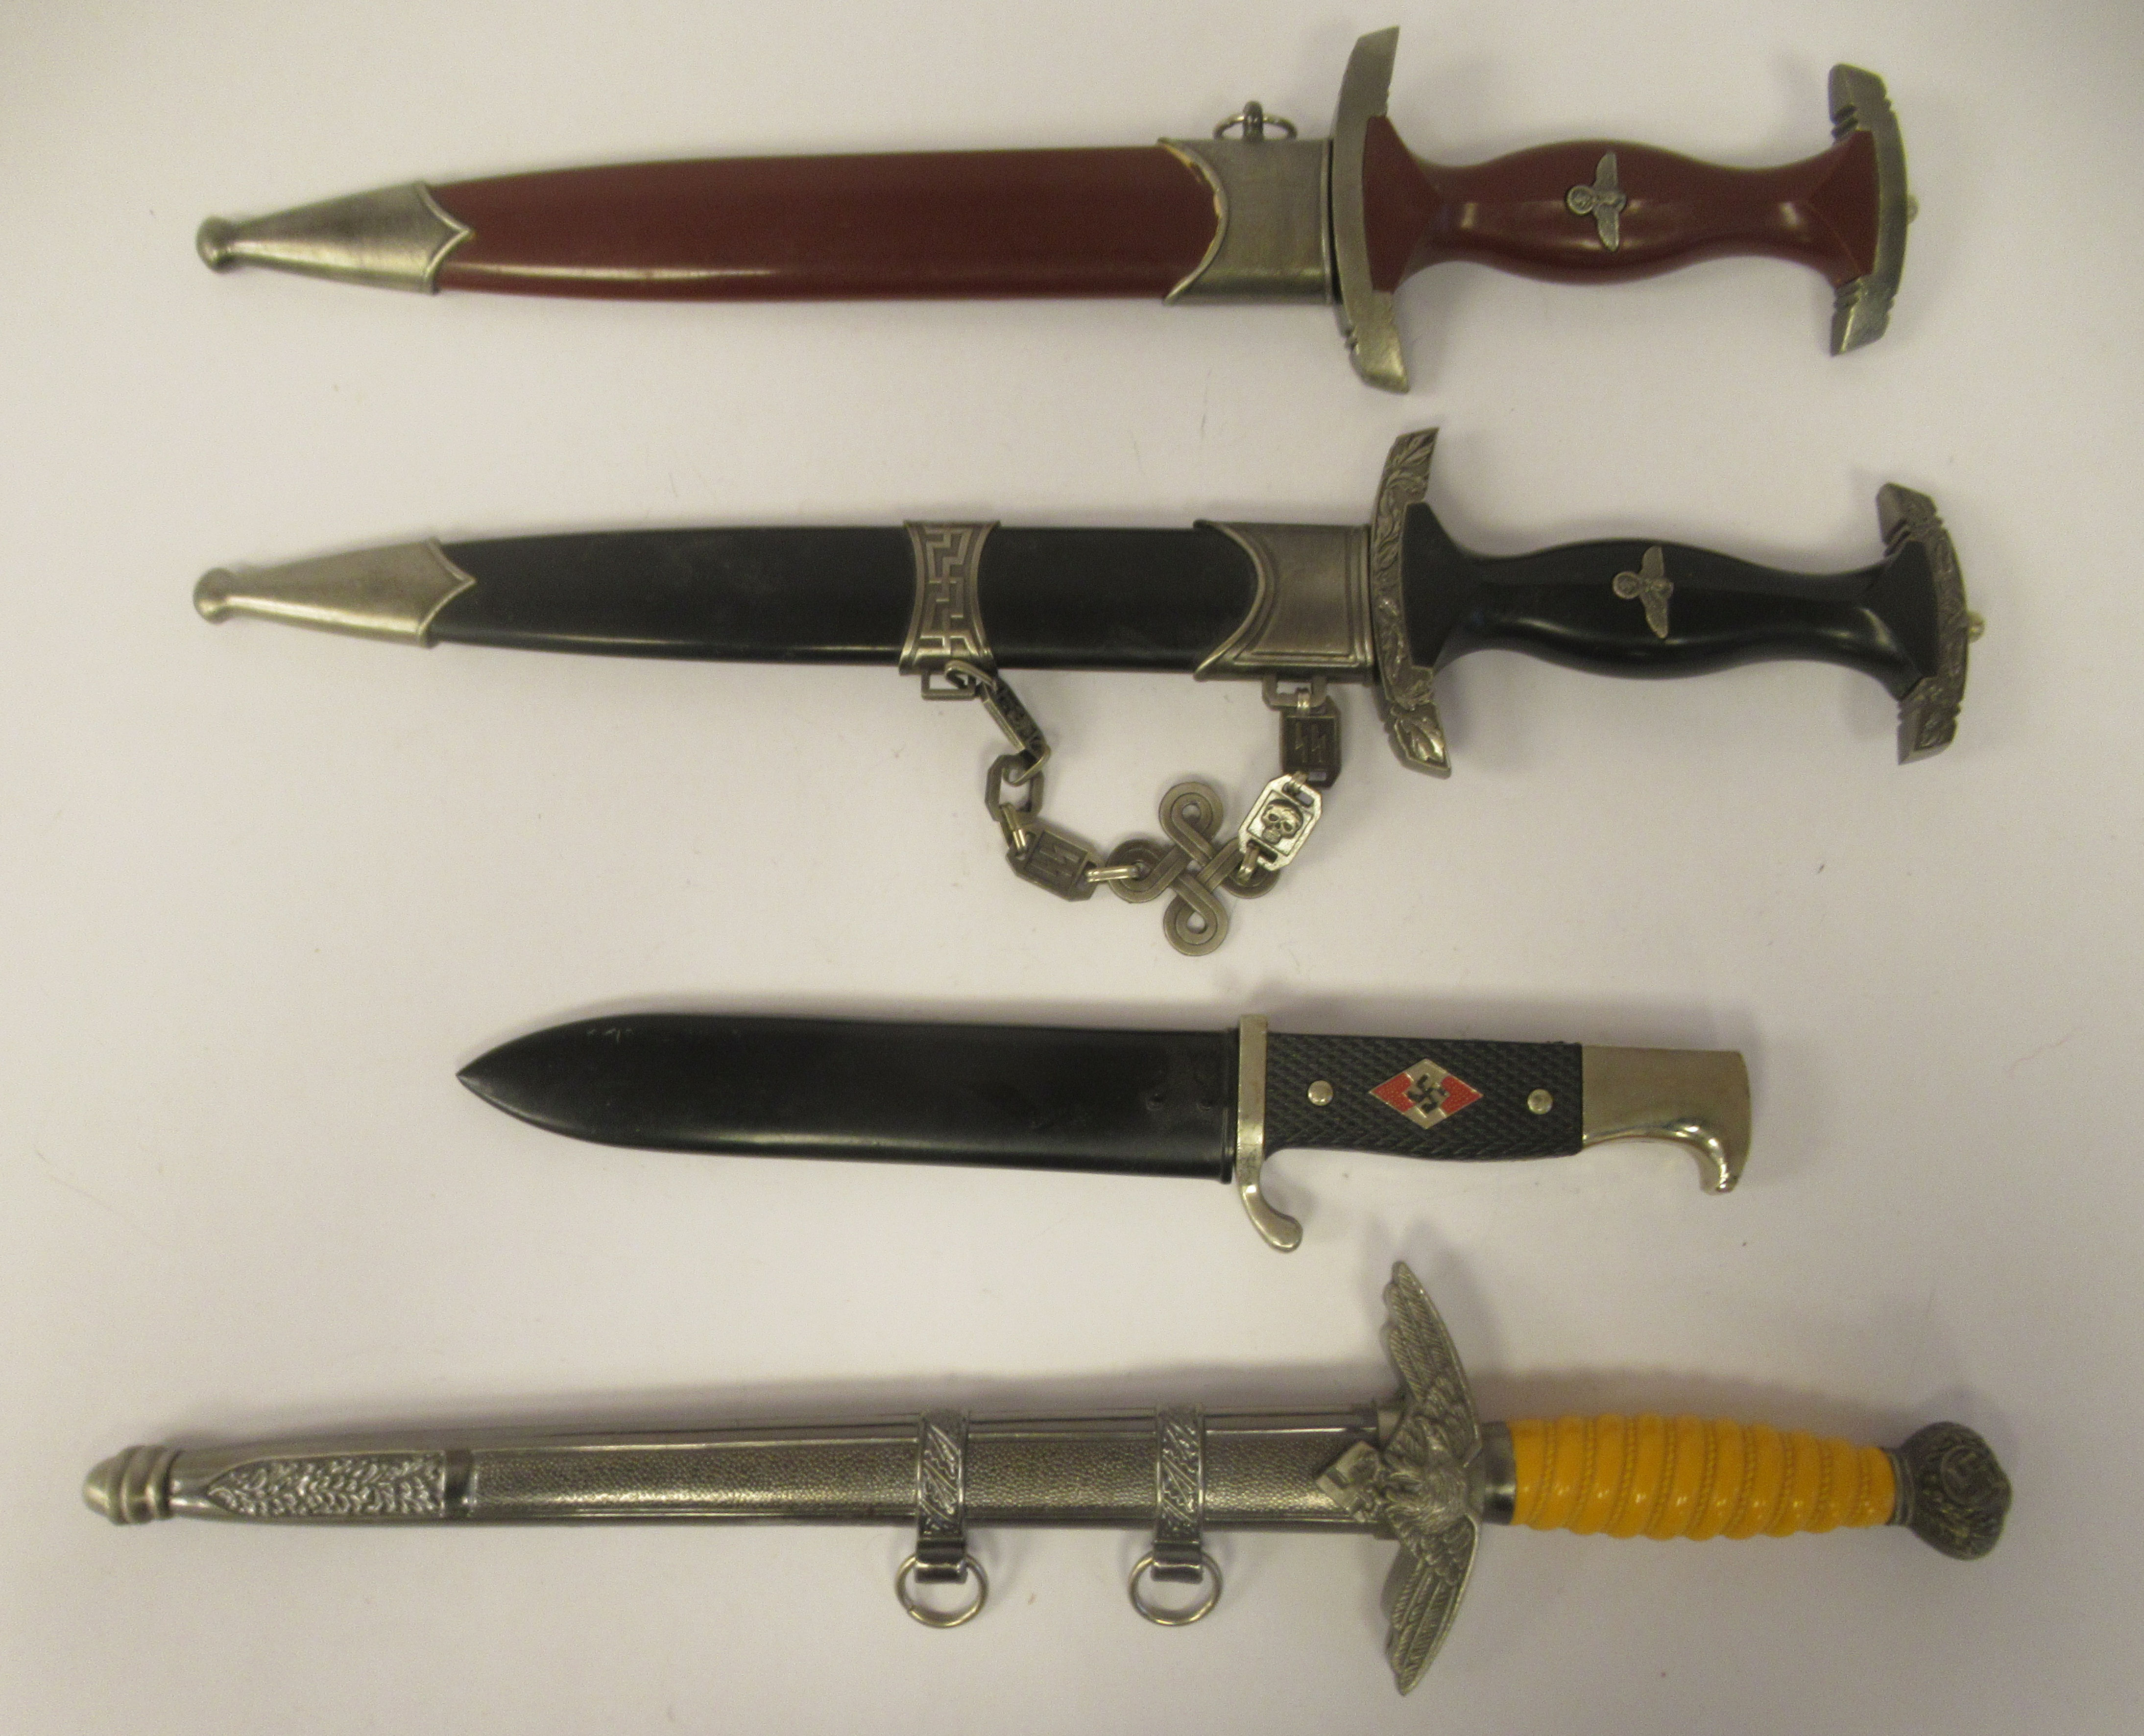 Four replica Third Reich era bladed weapons, viz. a Hitler Youth dagger, in a steel sheath; two